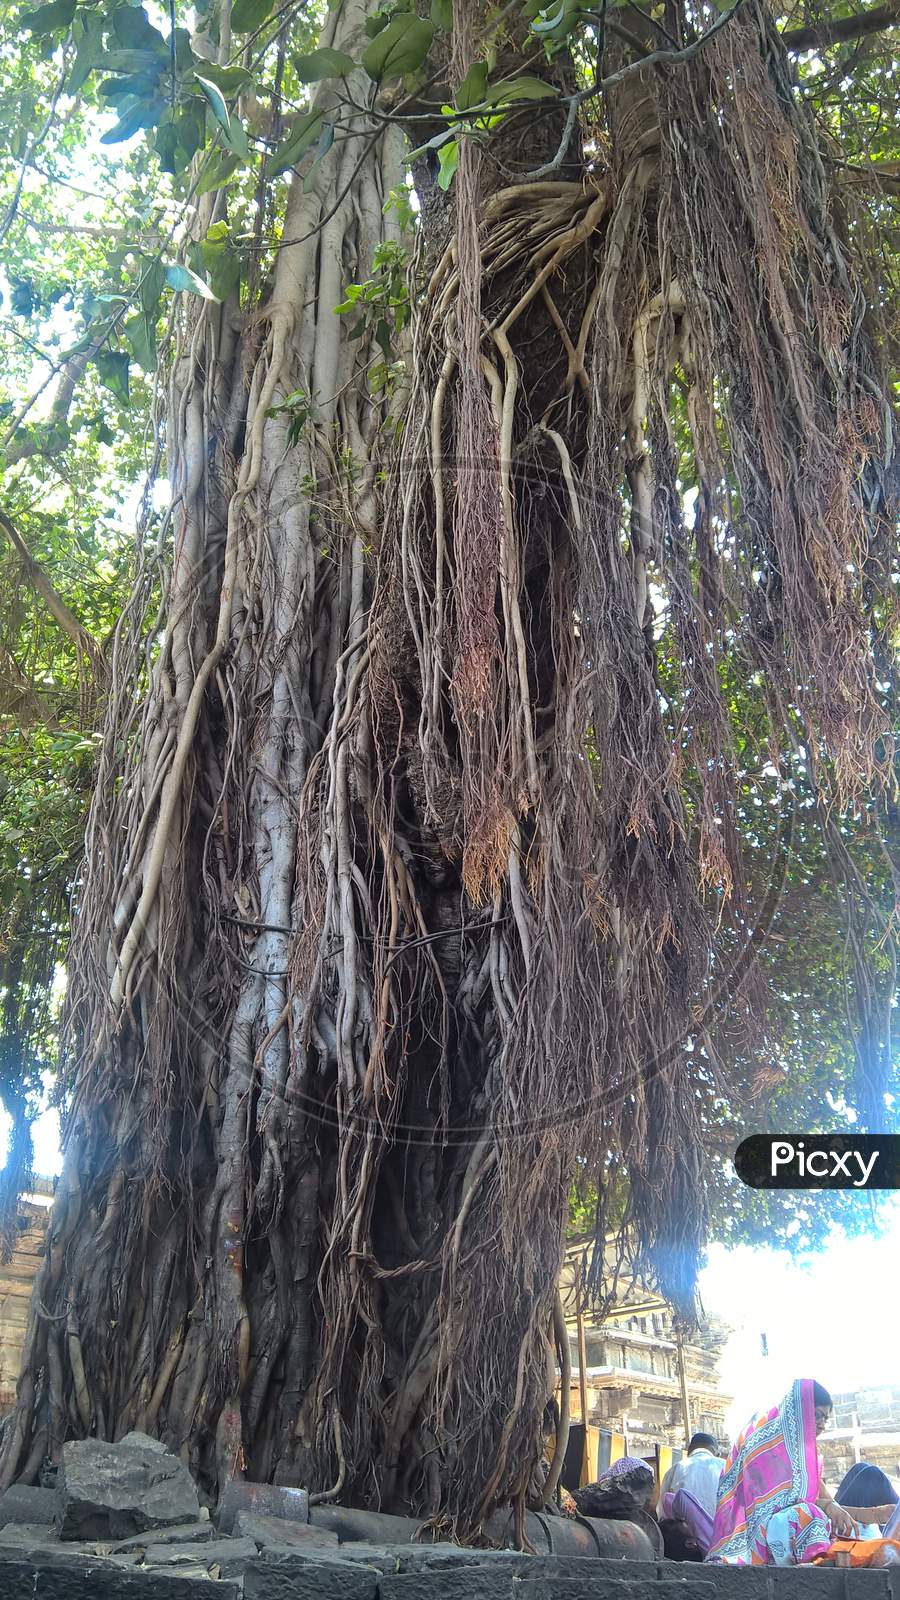 Banyan tree in a temple of India